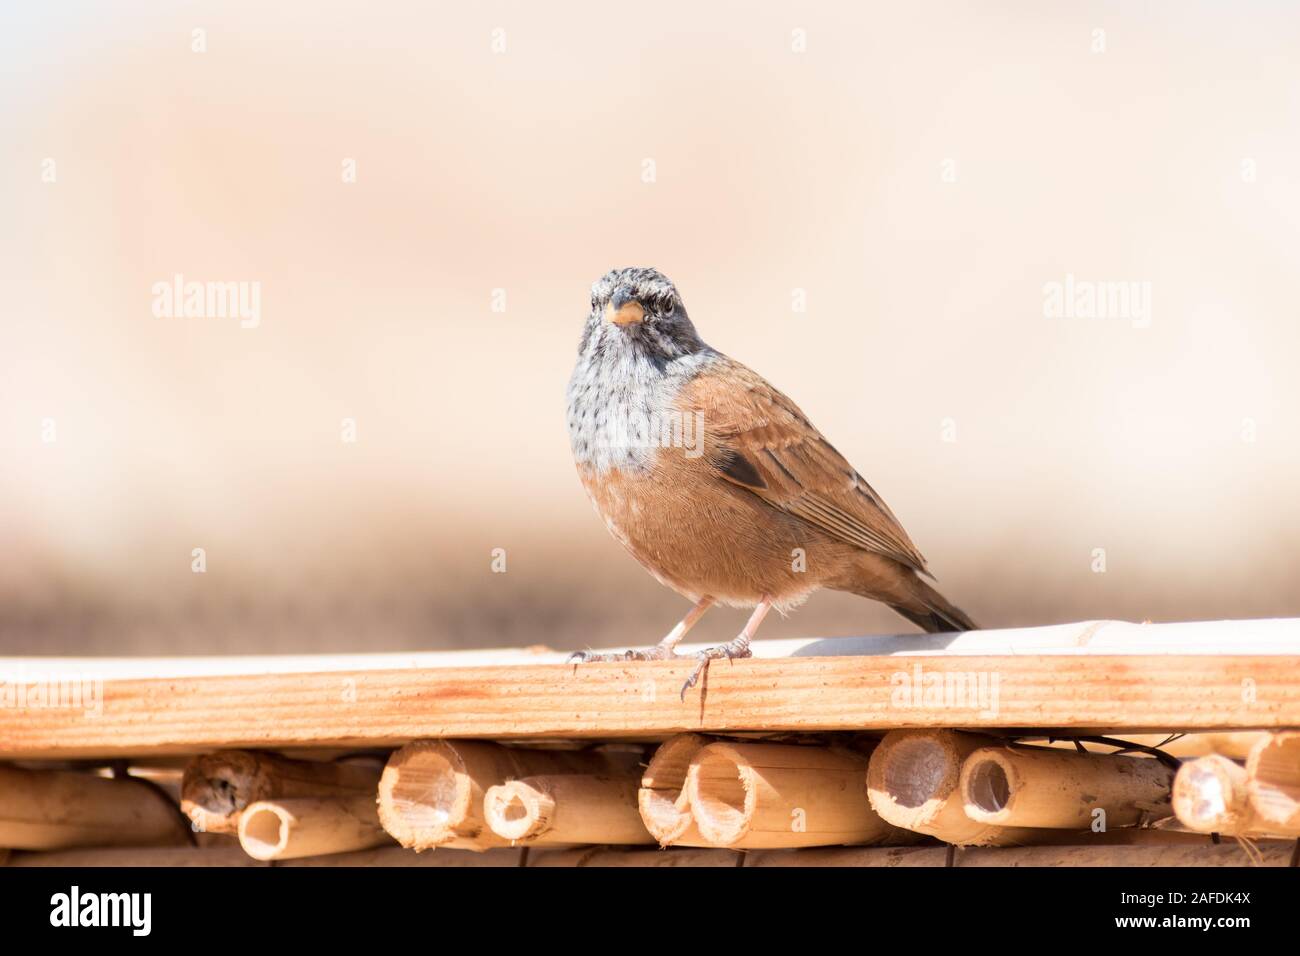 Close up of an adult House Bunting (Emberiza sahari) perched on a thin wooden ledge in the hot sun of Marrakesh, Morocco. Stock Photo